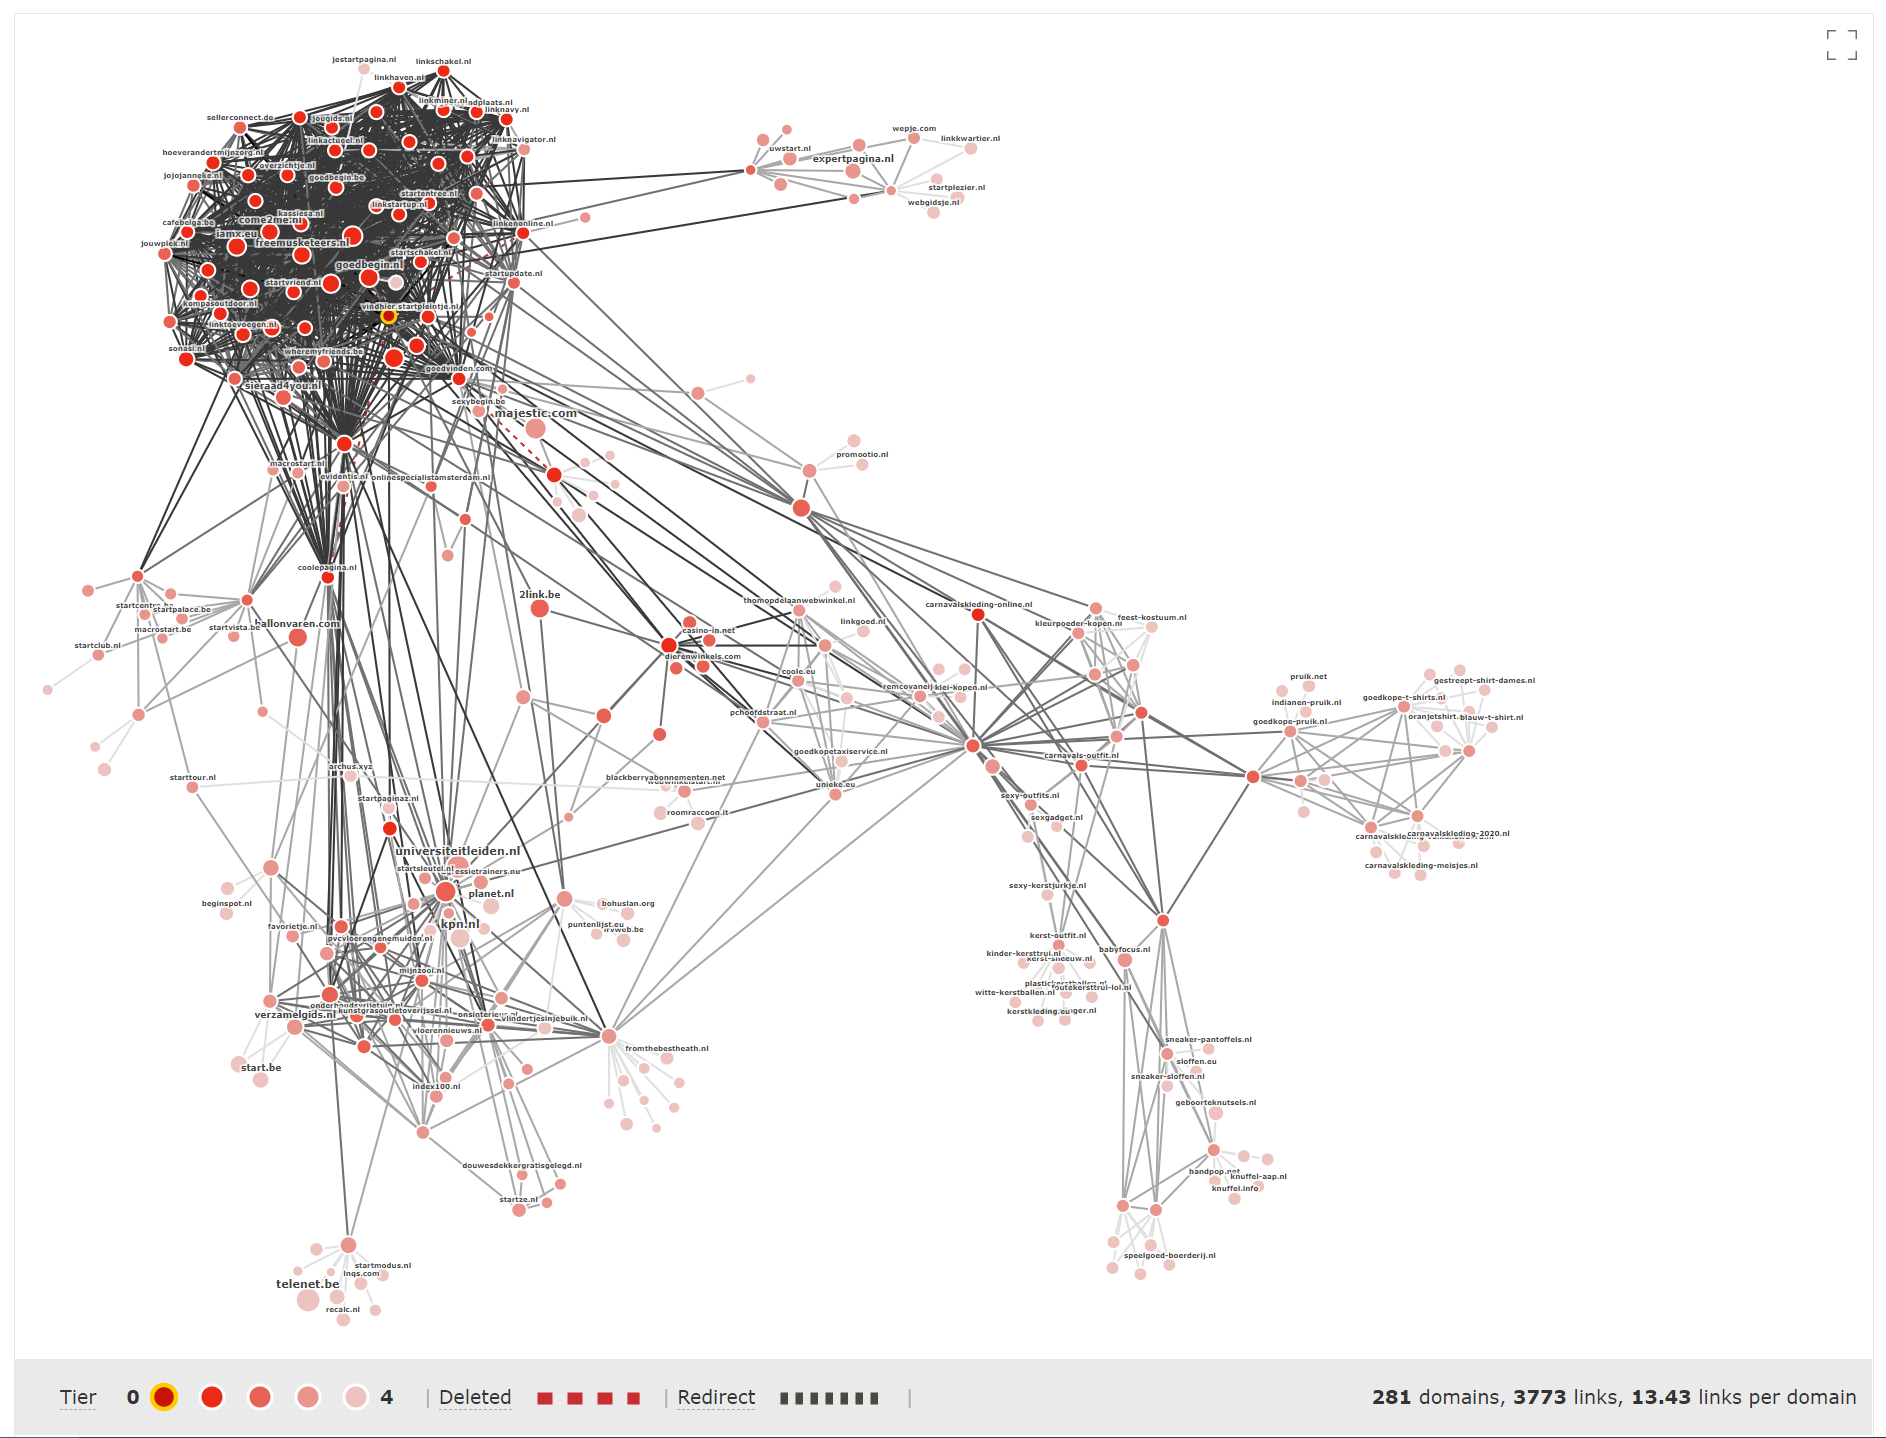 A very interlinked network graph